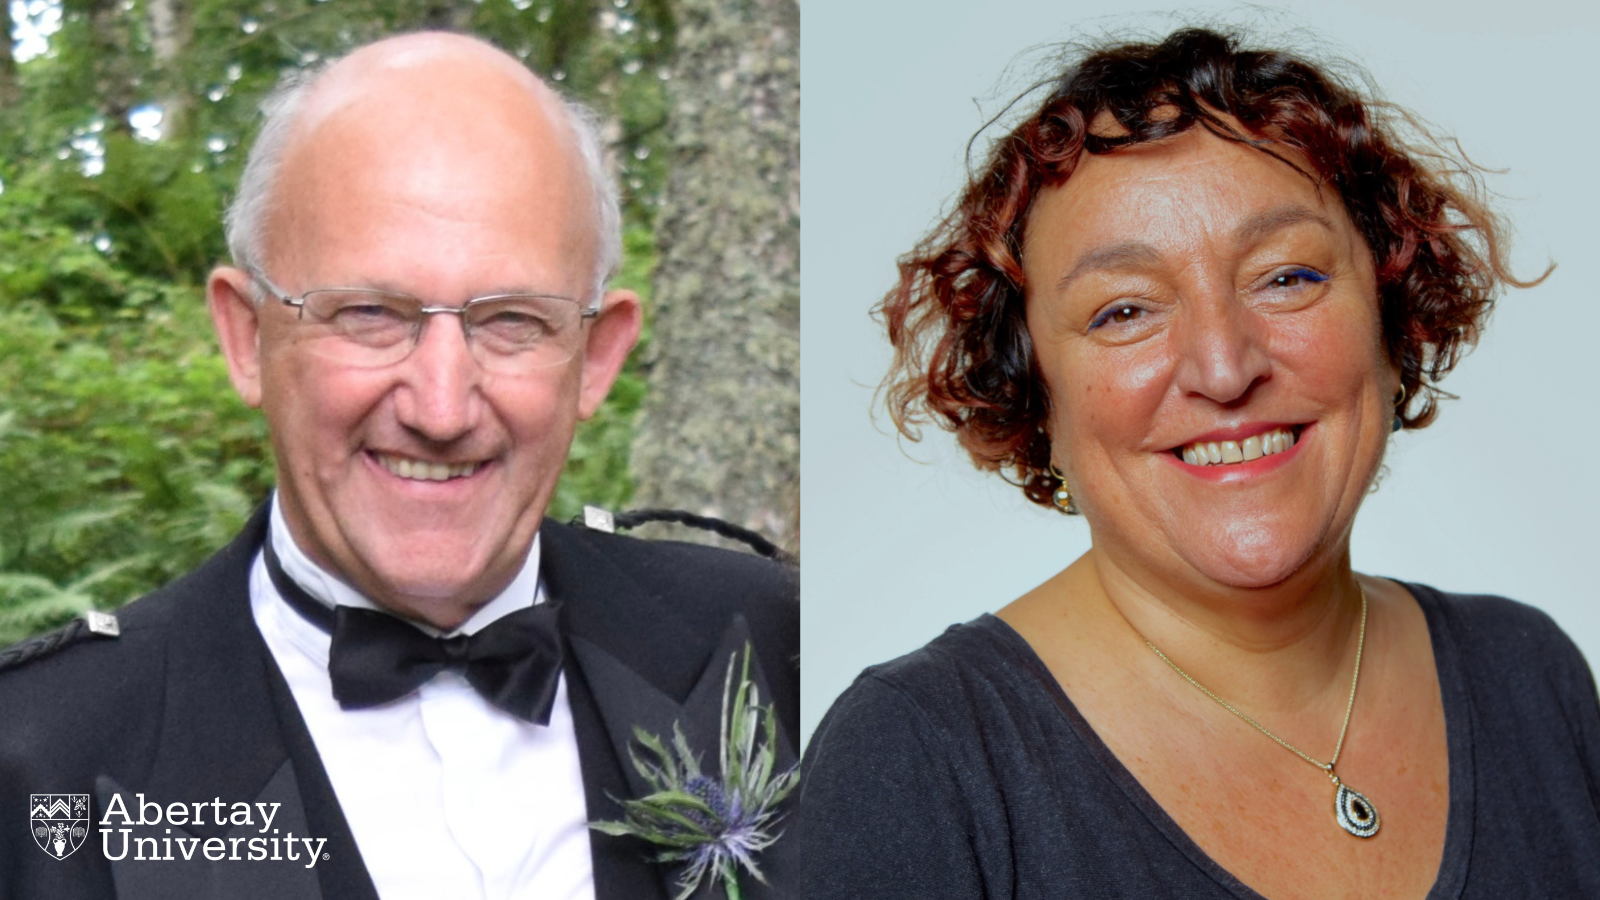 David Dorward MBE and Marie-Claire Isaaman to receive honorary degrees at July 12 ceremony